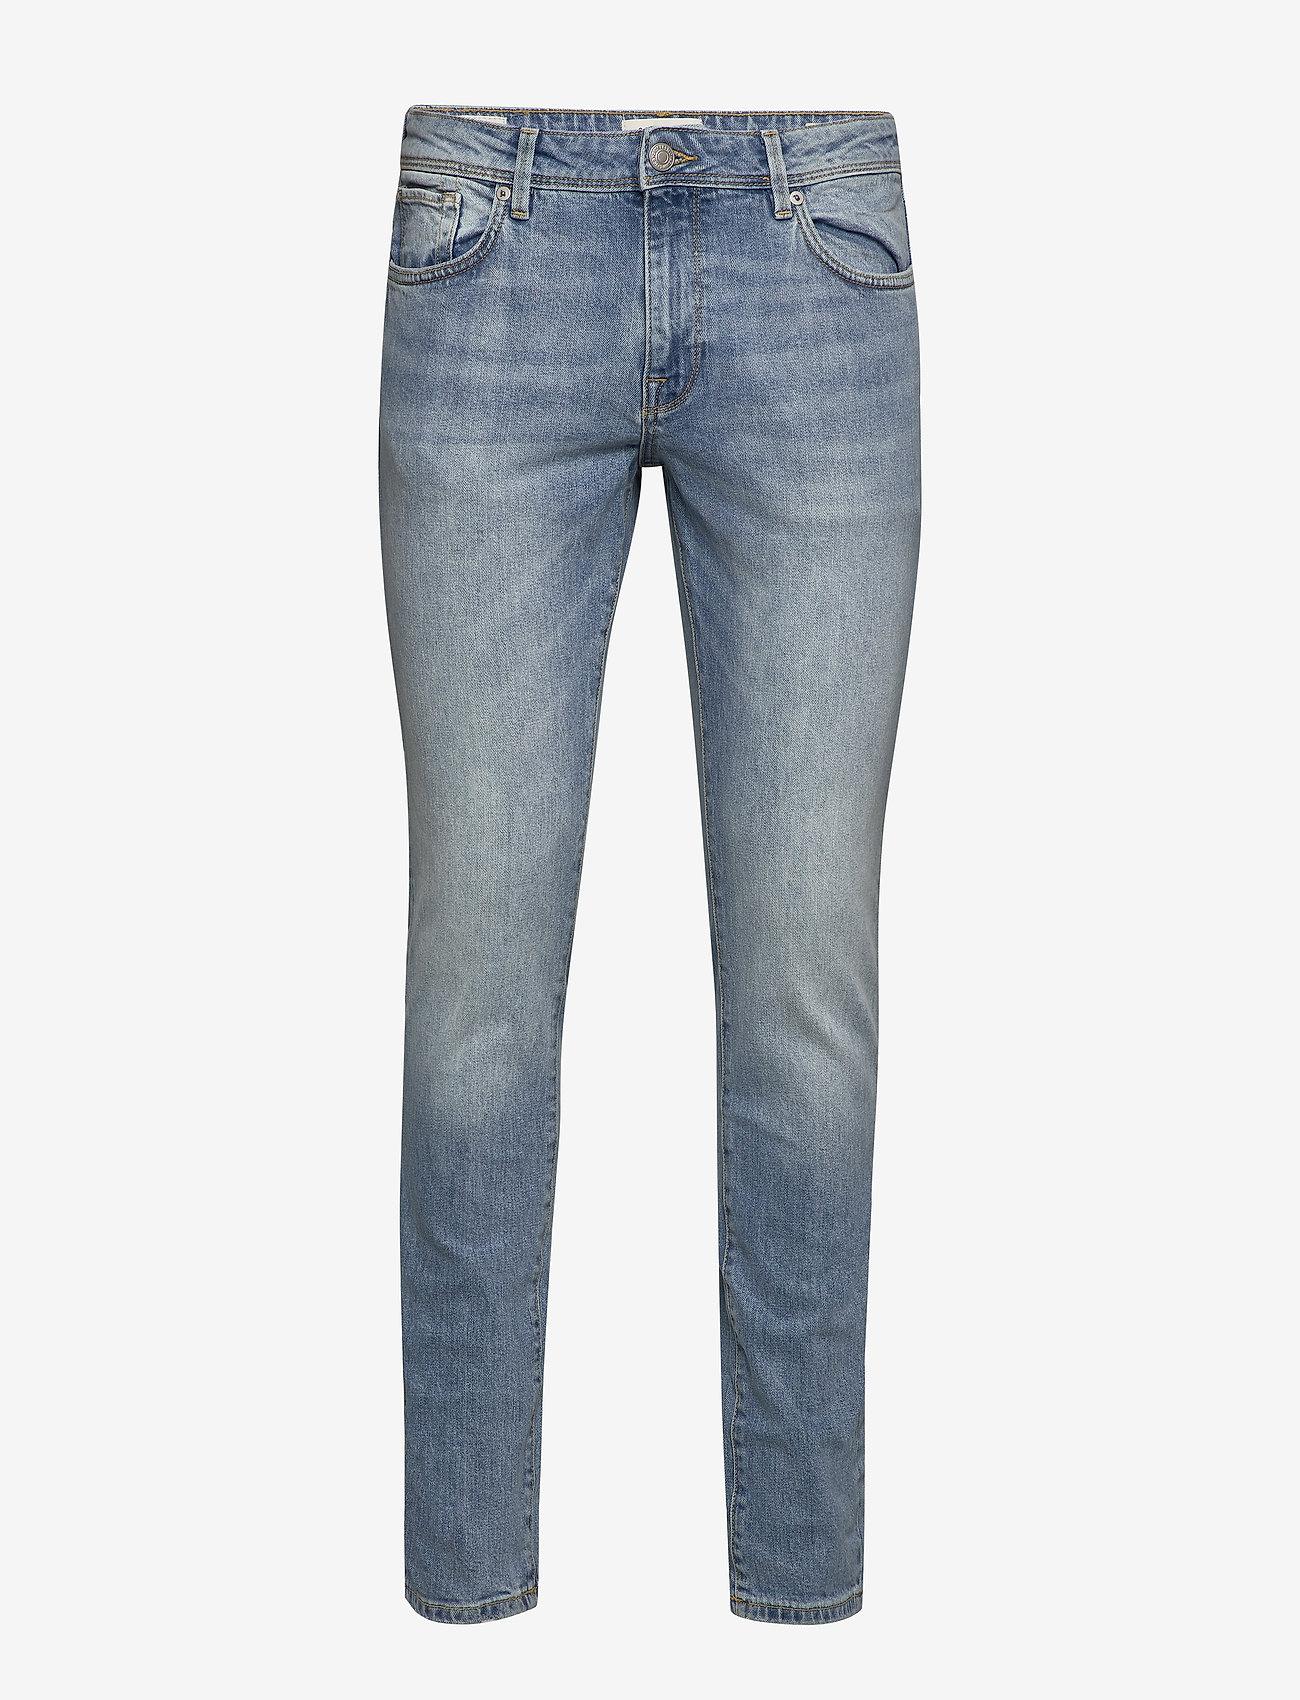 homme jeans